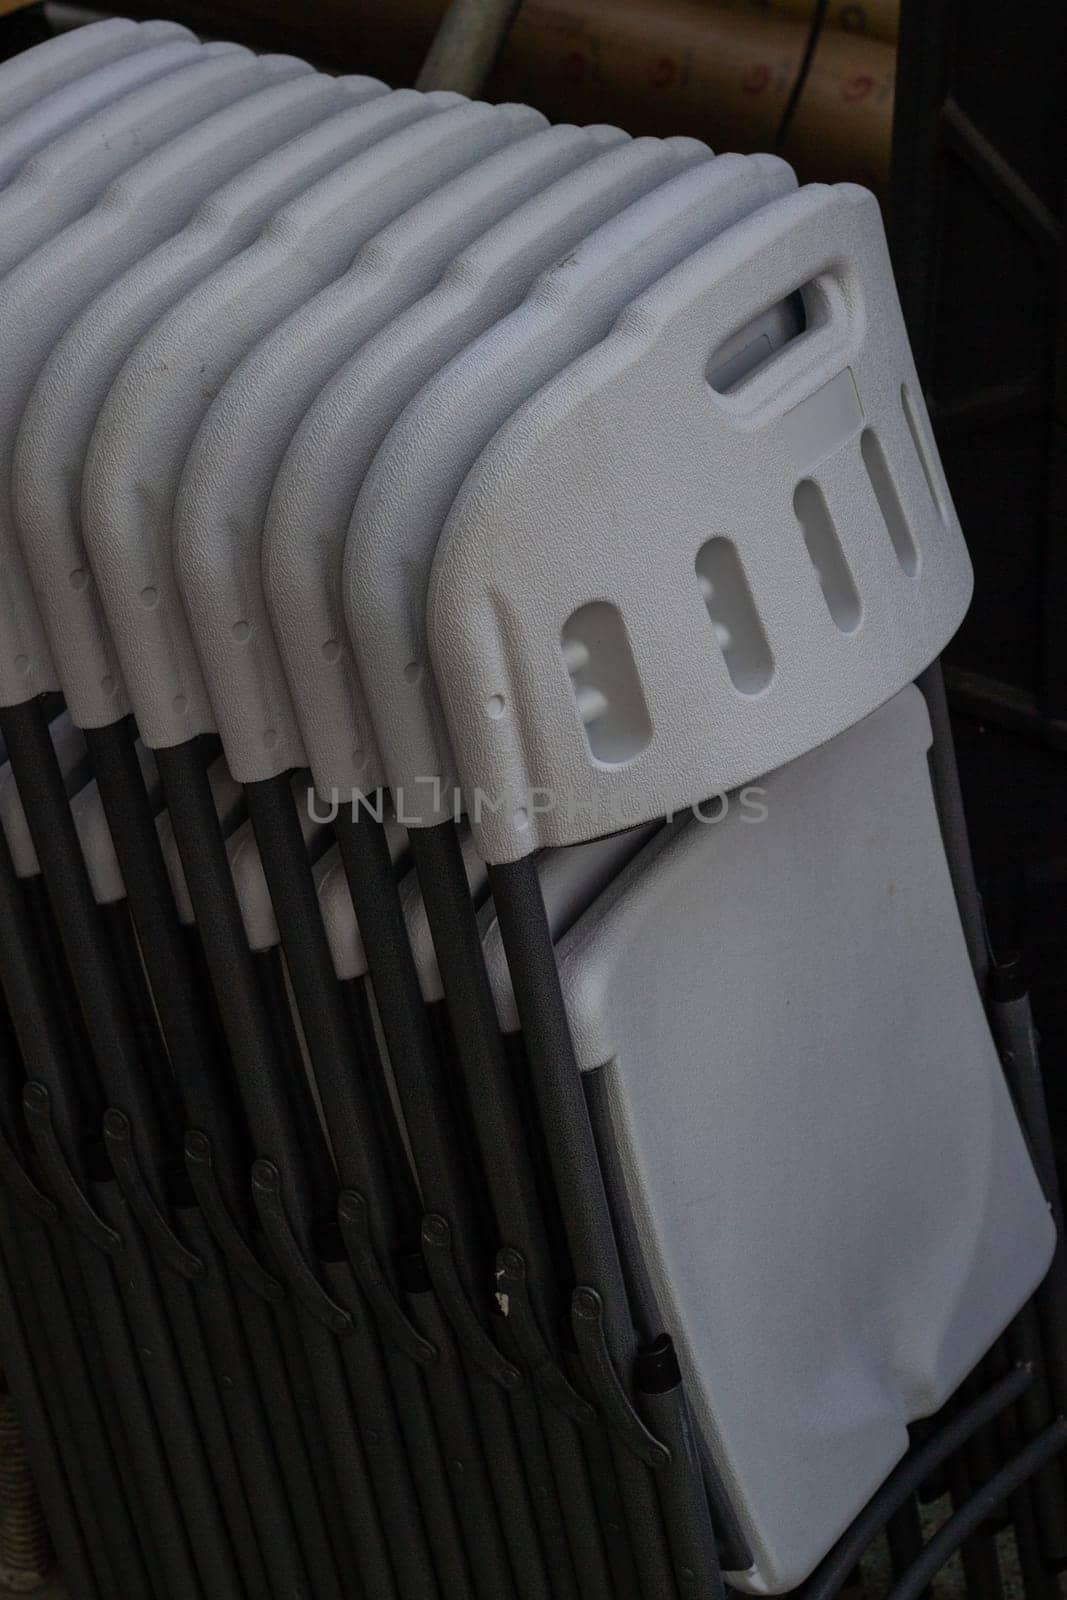 Plastic folding chairs are white stacked on top of each other. Mass events. Outdoor furniture.